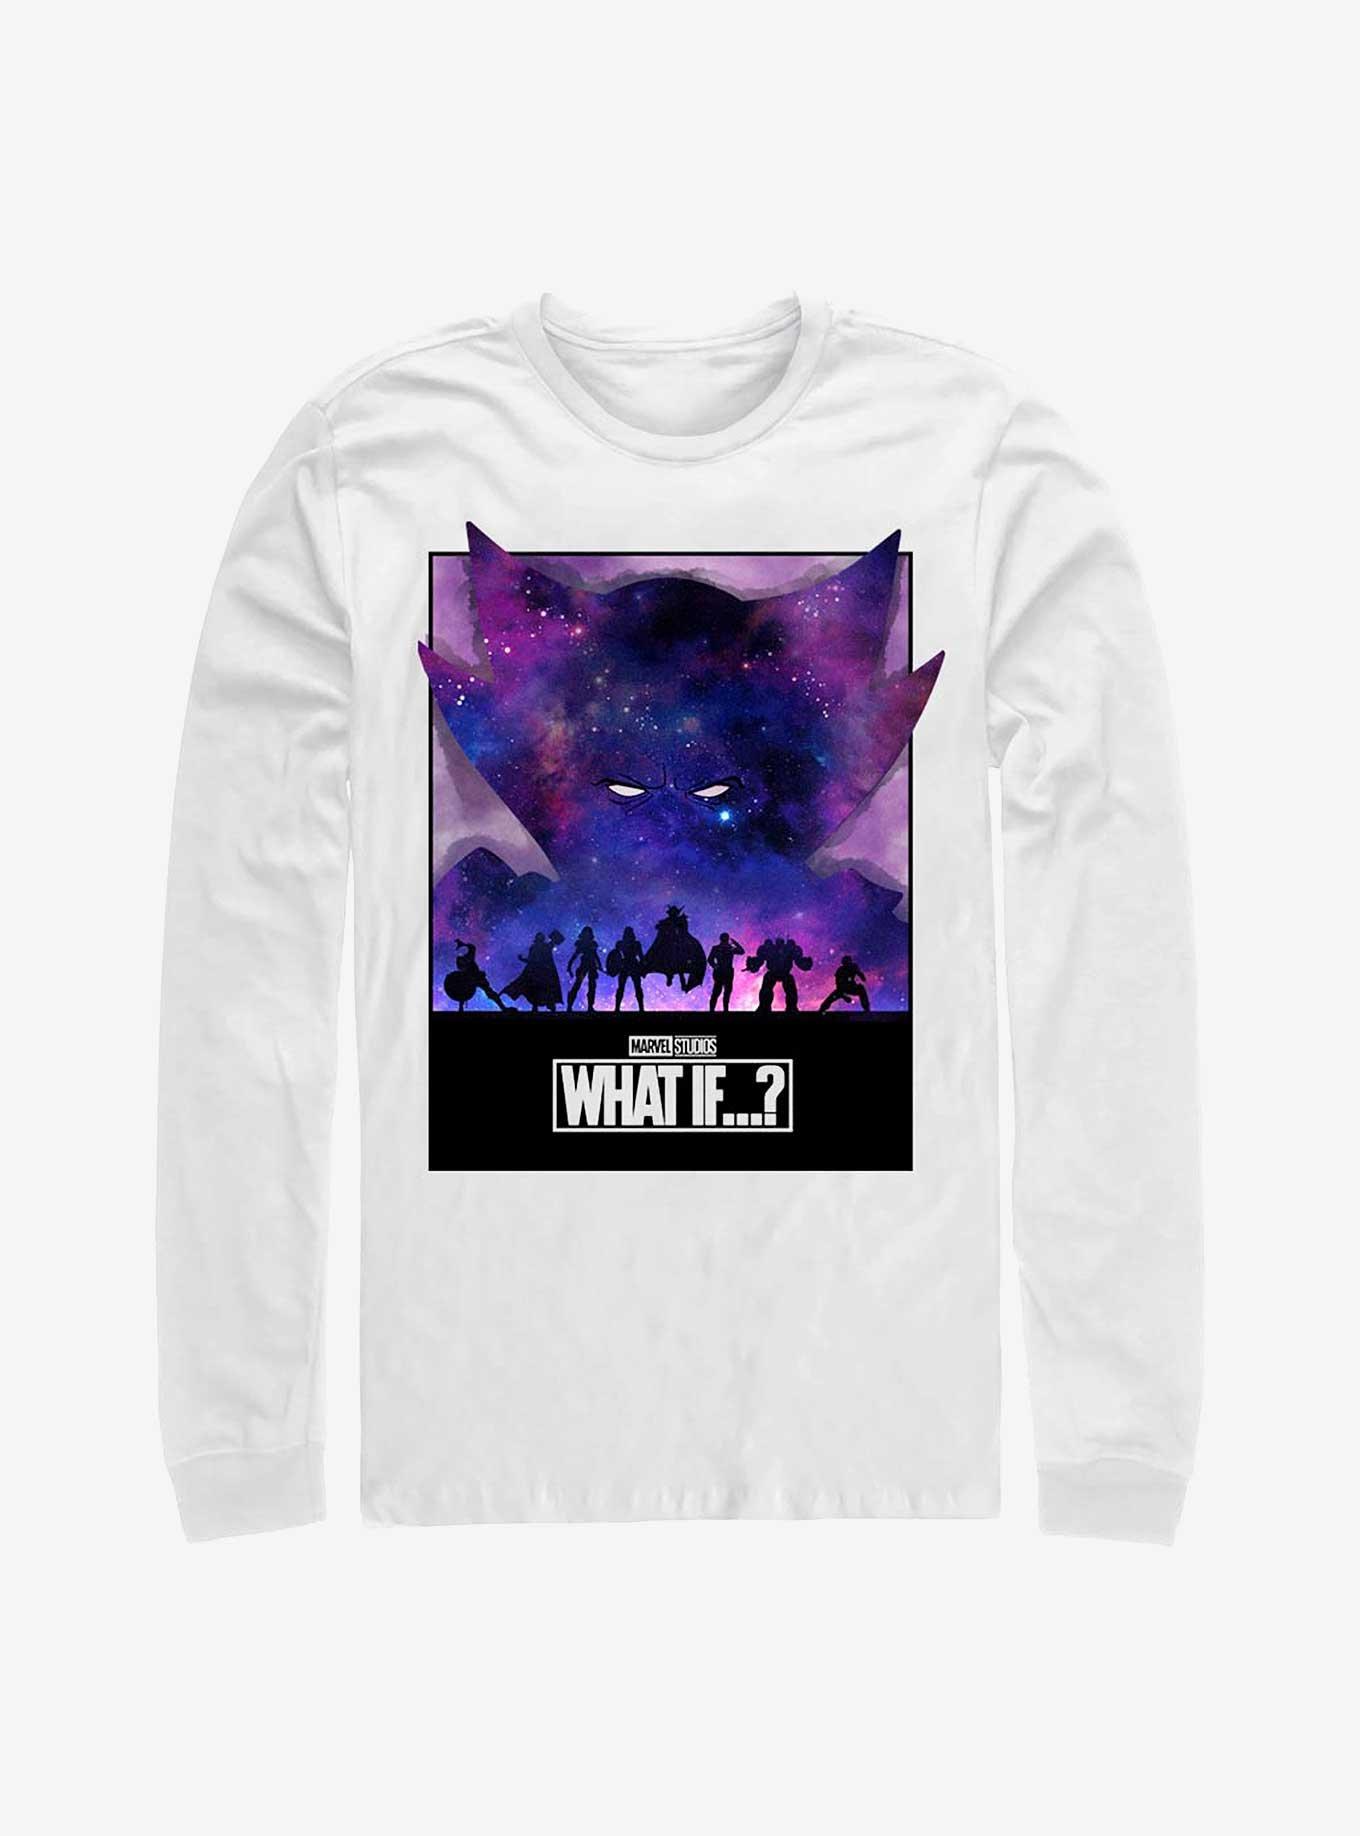 What If...? A Watcher Watches Long-Sleeve T-Shirt